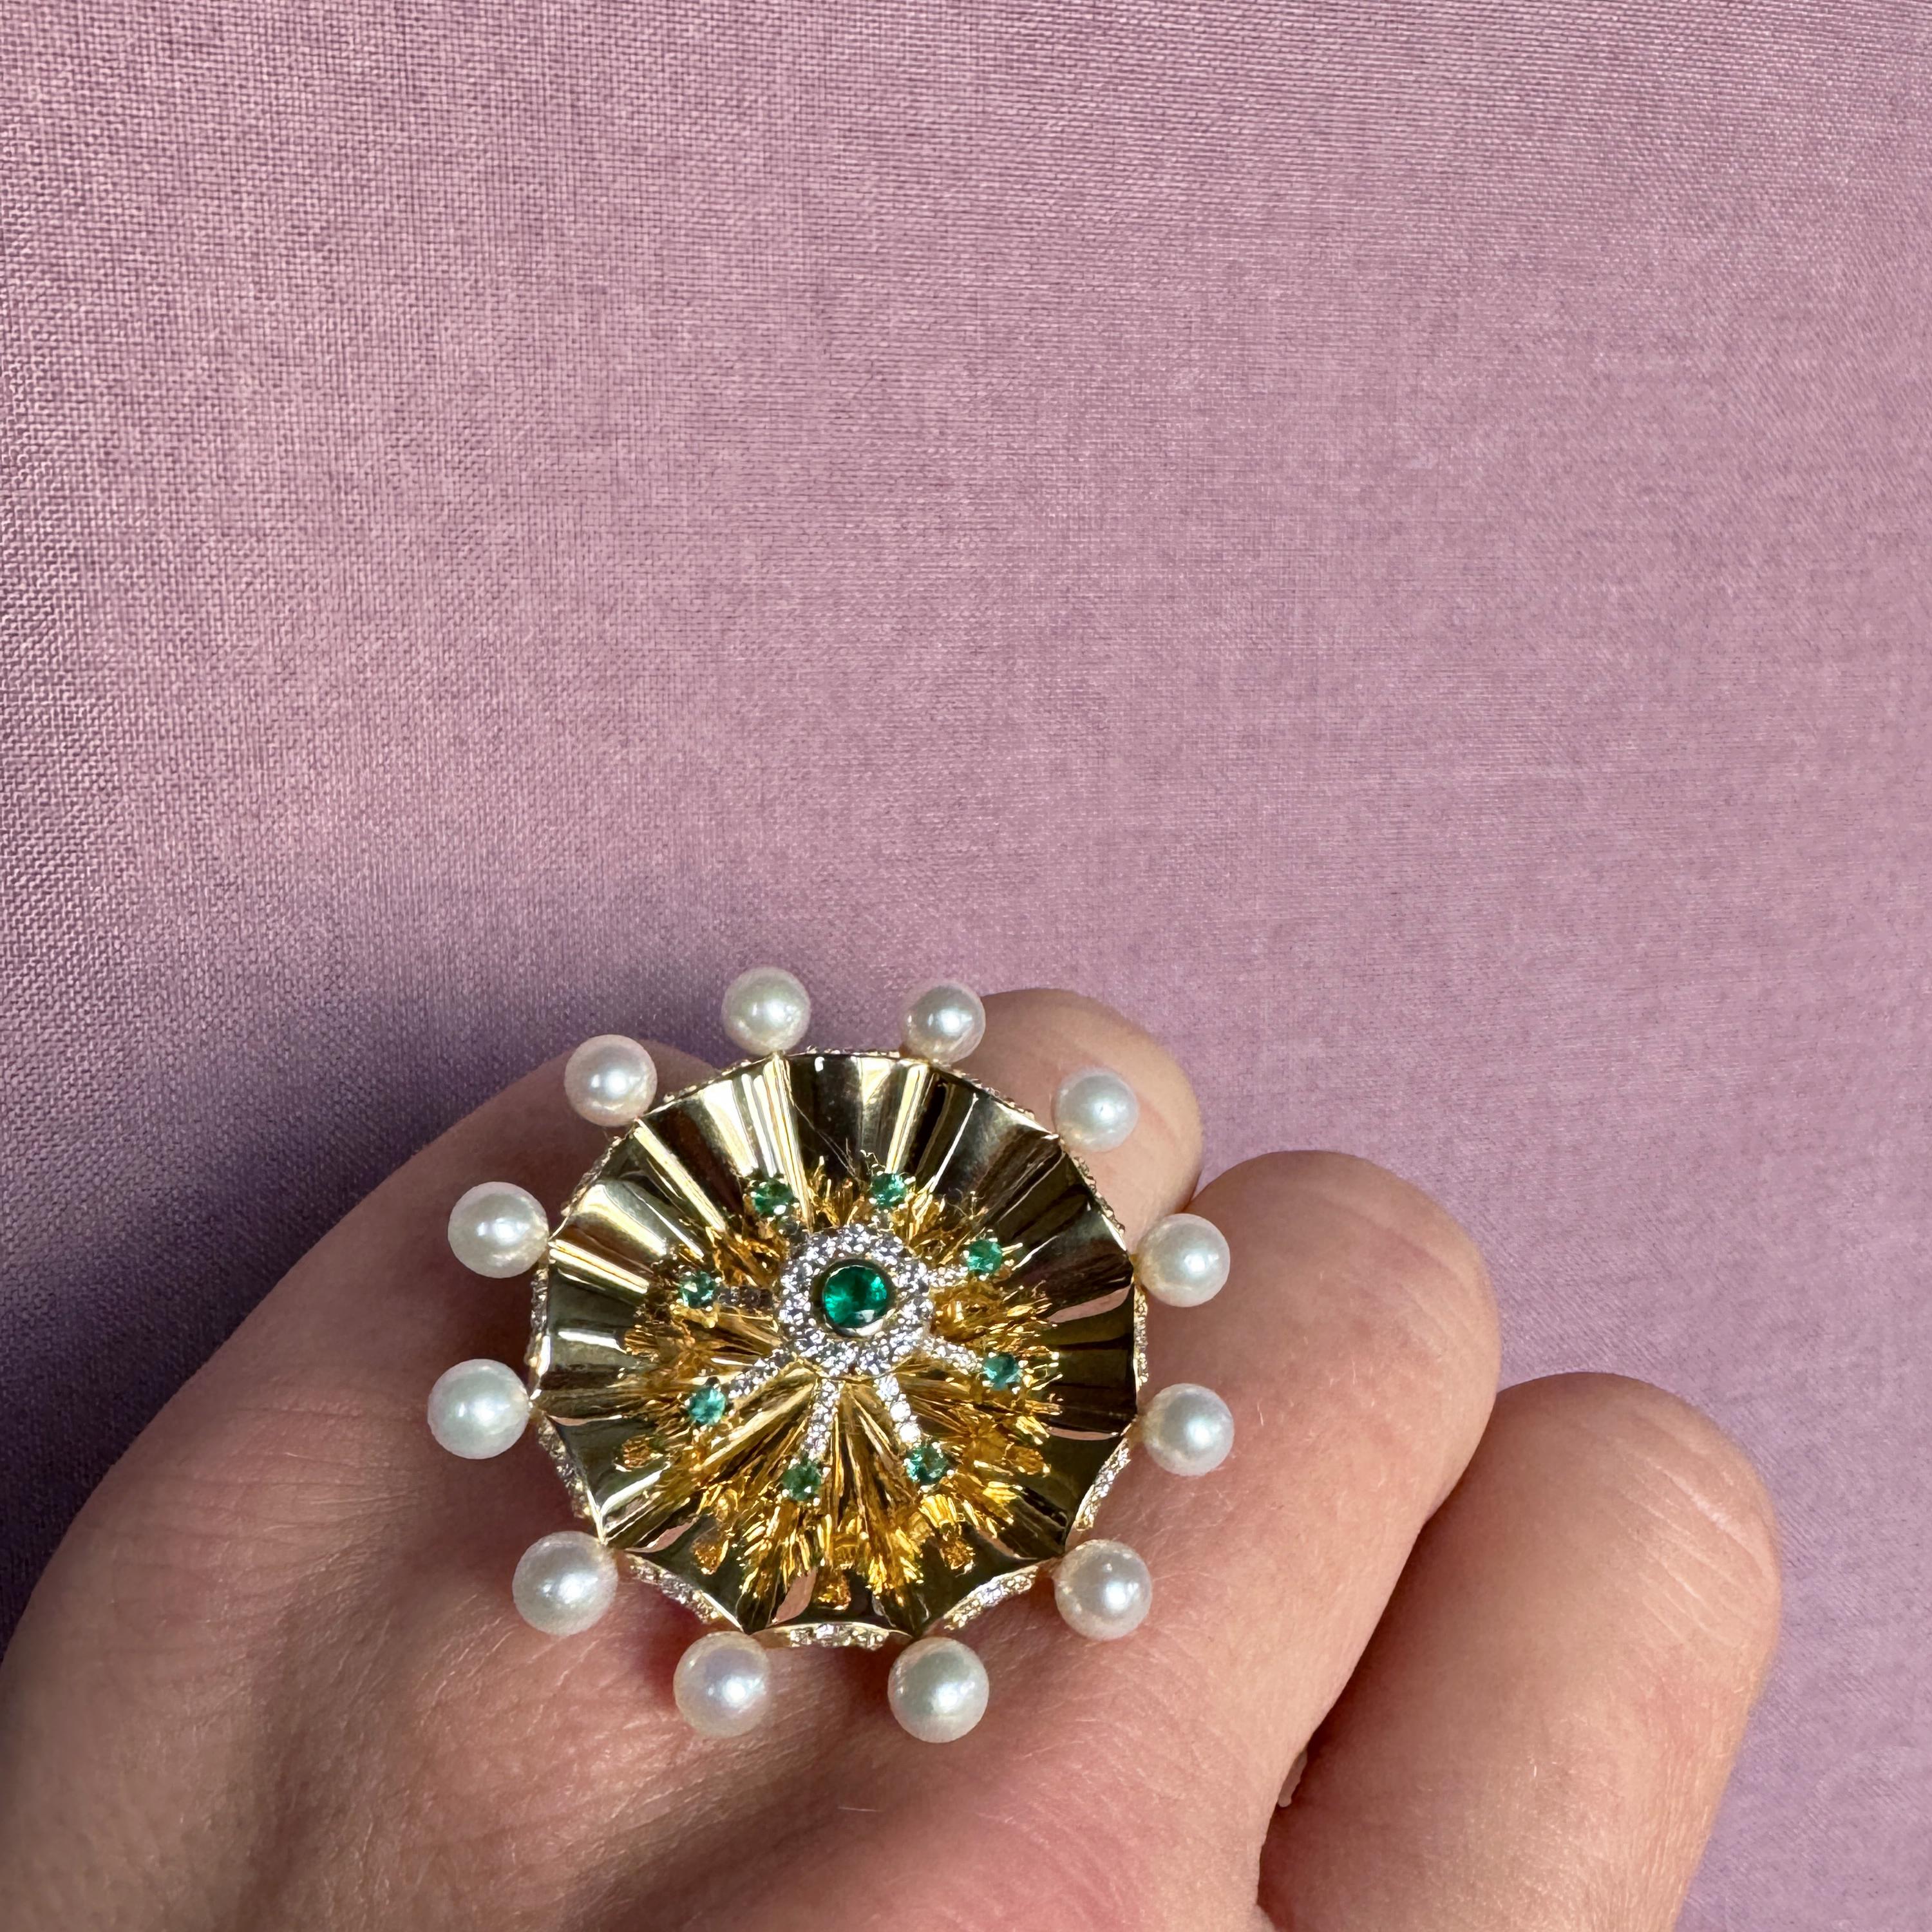 Contemporary Umbrella Ring in 18 Karat Gold with Diamonds, Emeralds And Pearls